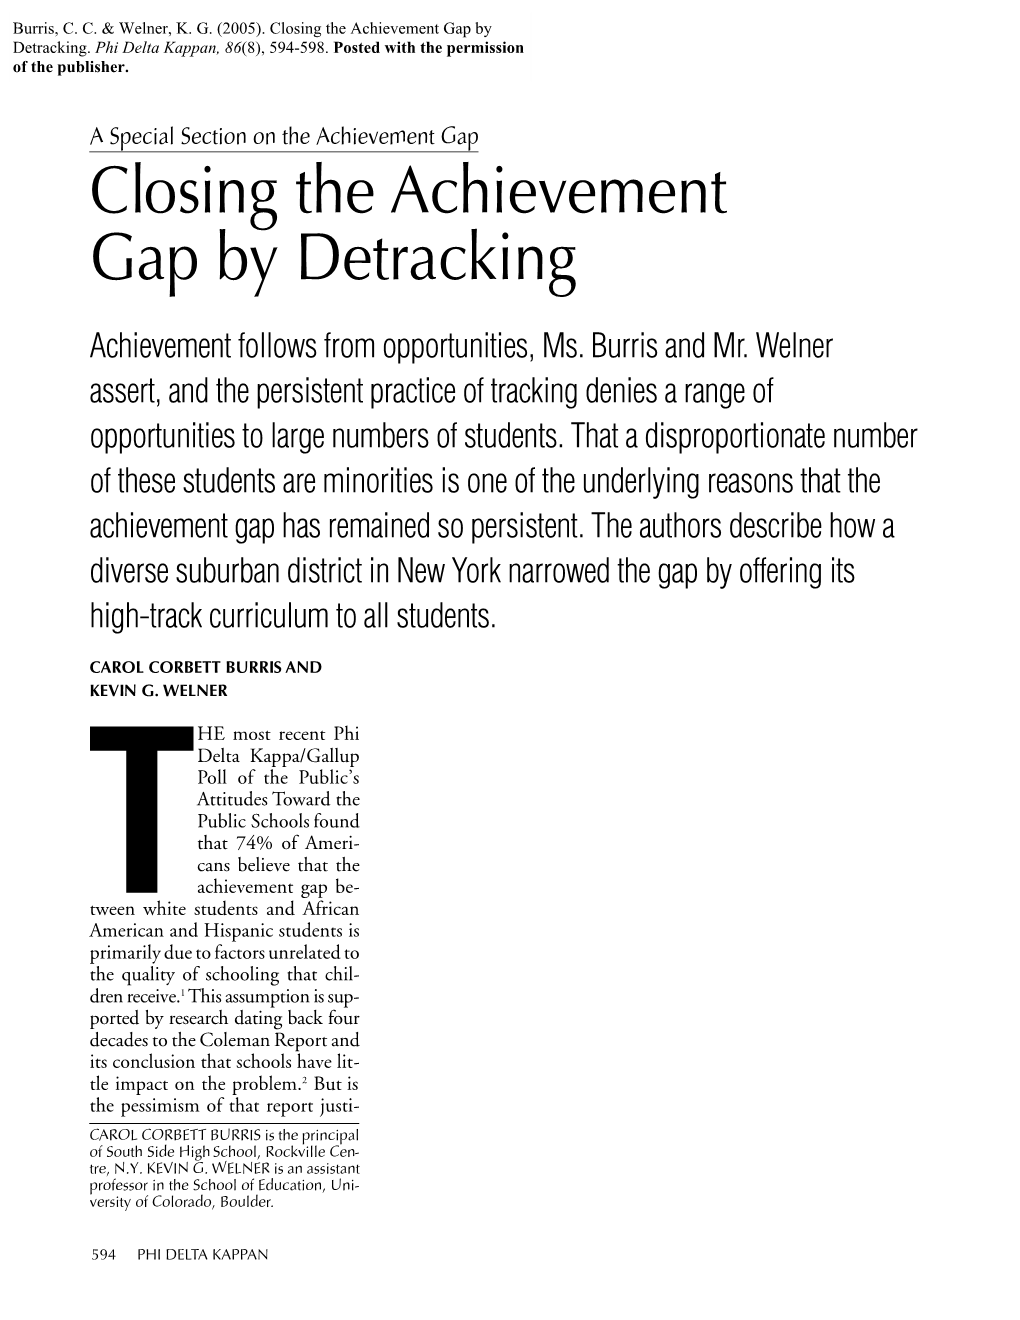 Closing the Achievement Gap by Detracking